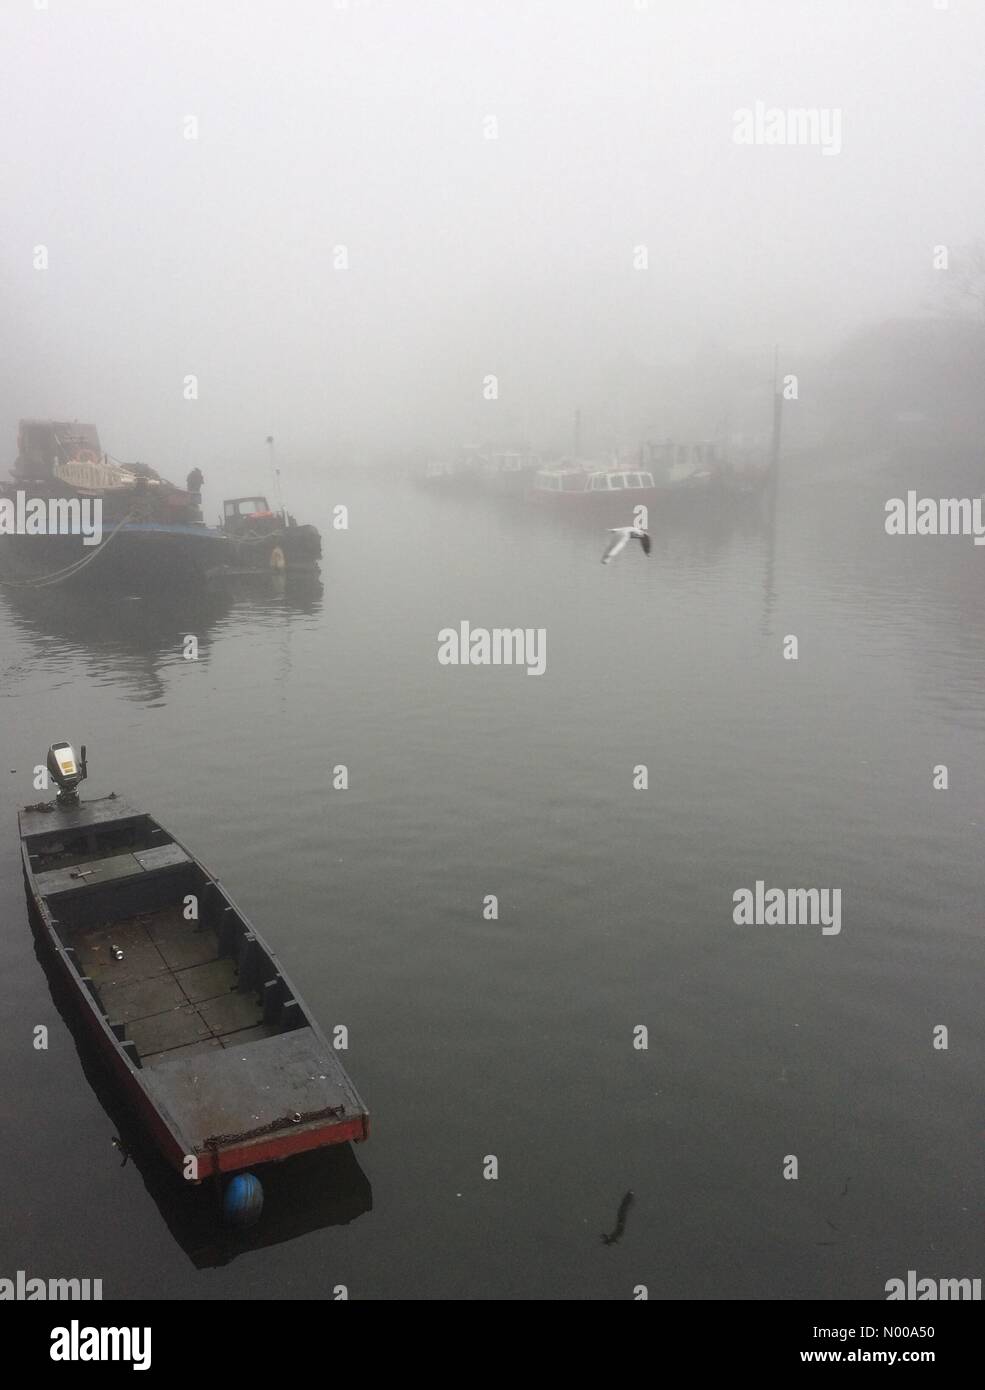 Twickenham, Middlesex, UK. 30th Dec, 2016. Boats moored in the mist on Thames by eel pie island twickenham Middlesex Credit: Tricia de Courcy Ling / StockimoNews/Alamy Live News Stock Photo